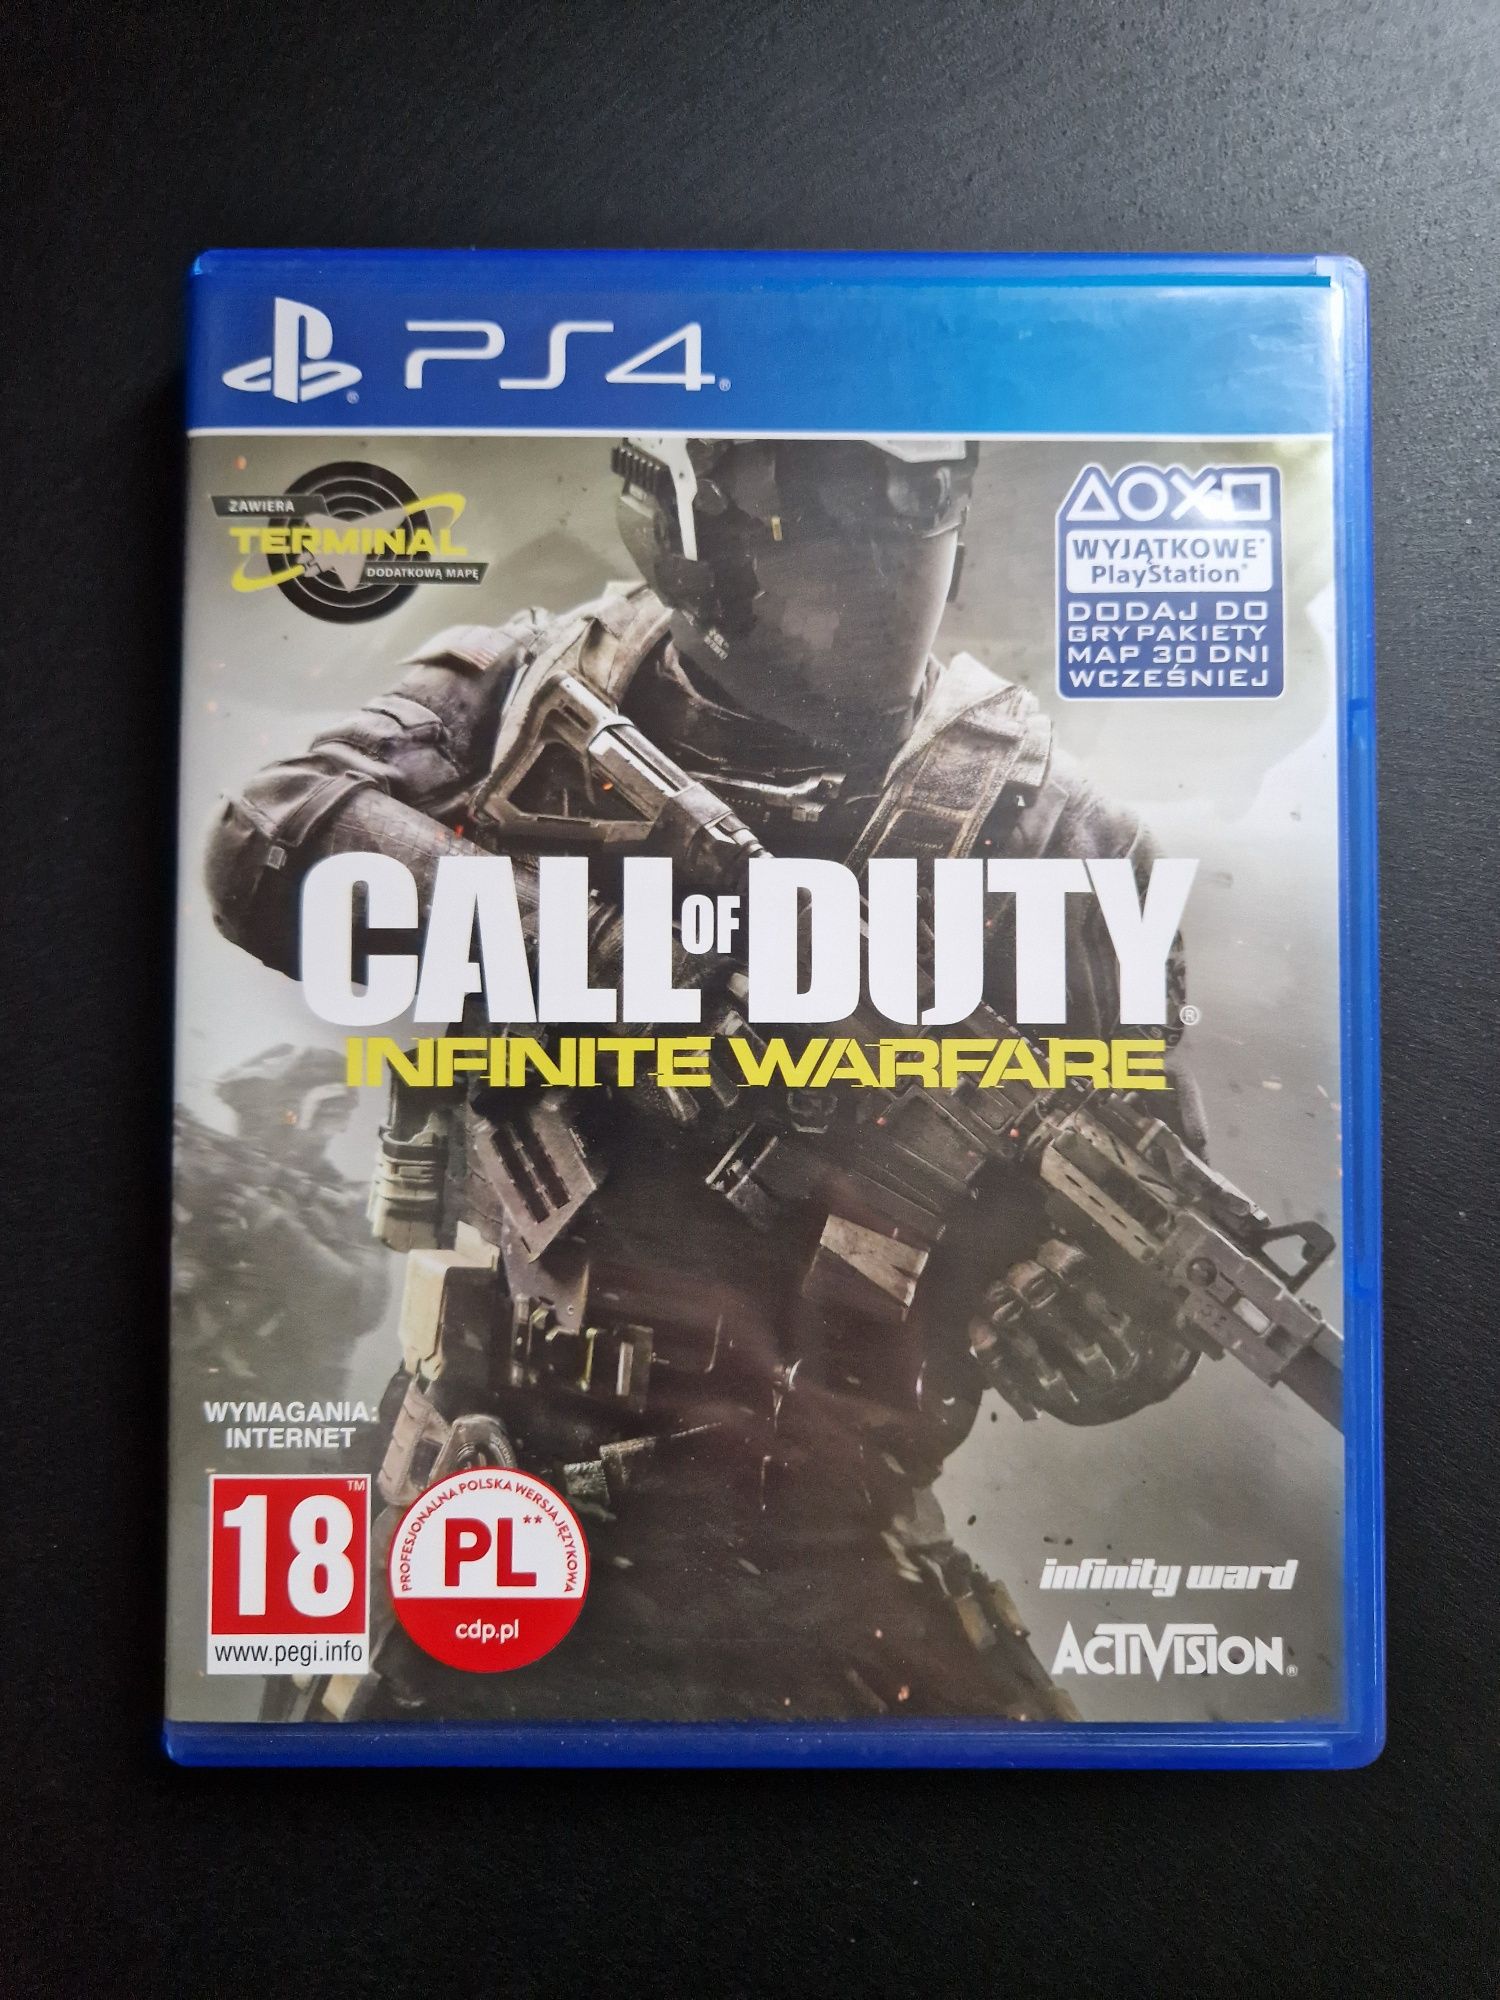 Gra Call of Duty IW PL ps4